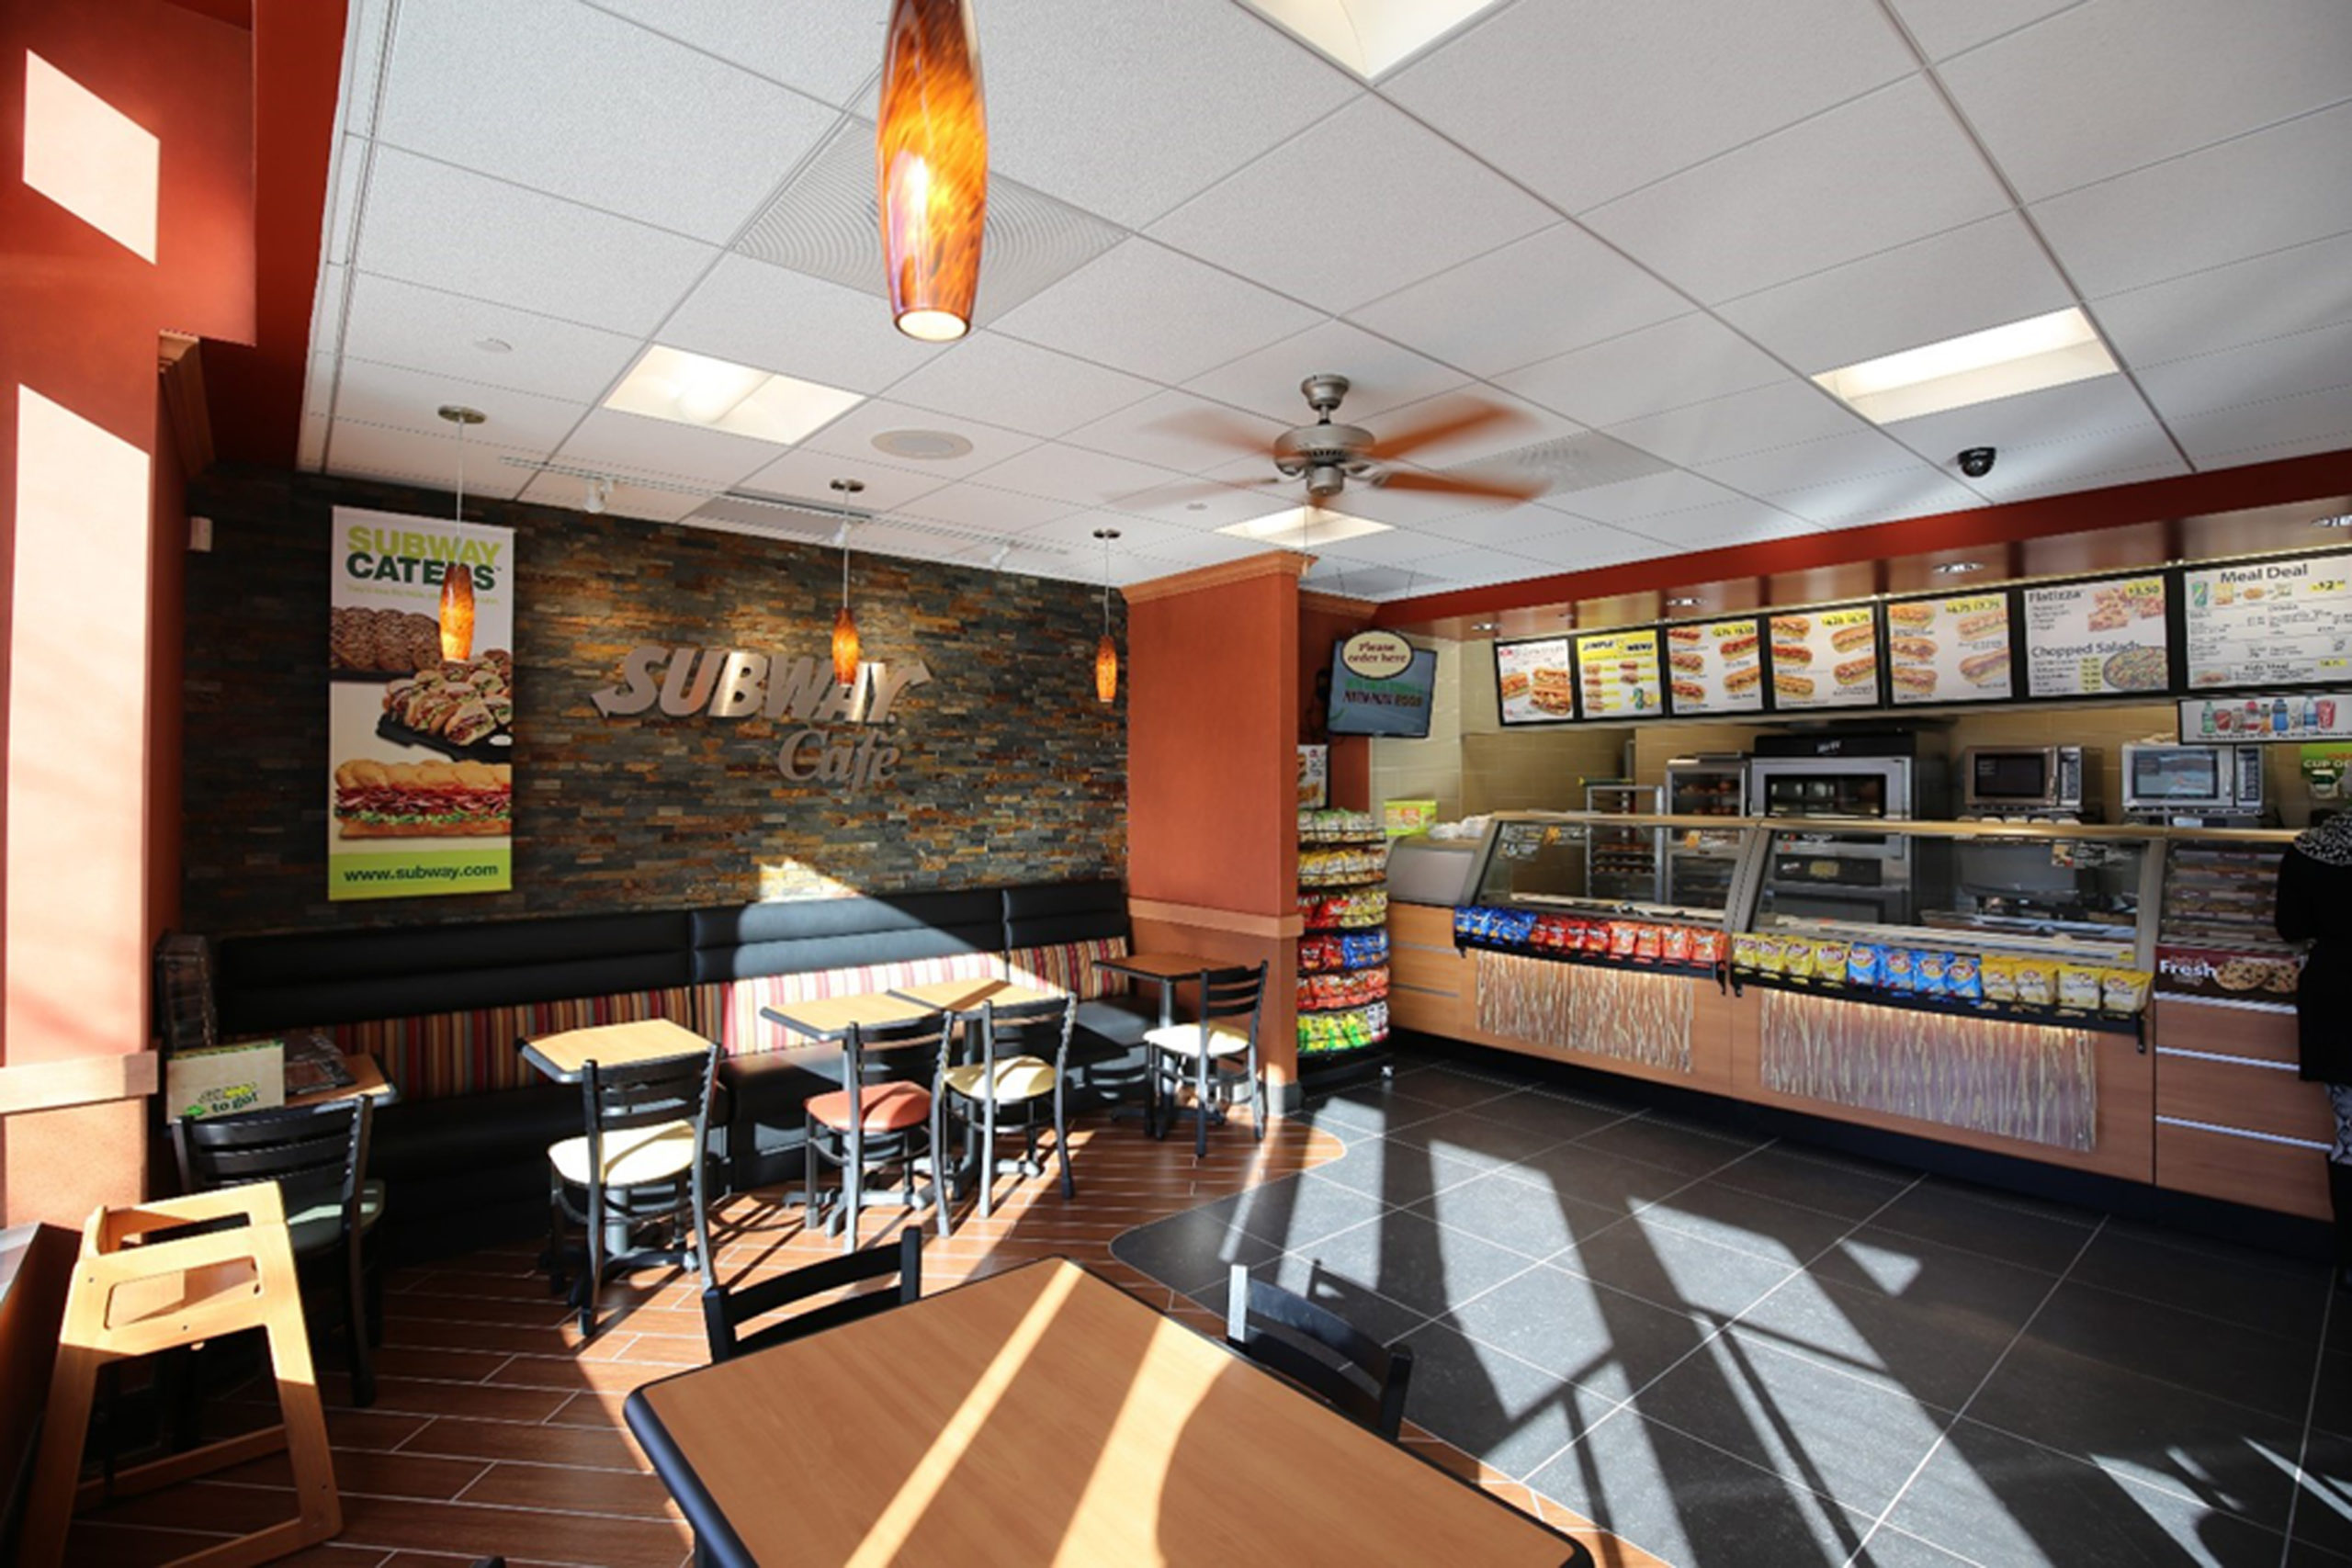 Subway - Dining Area and Counter